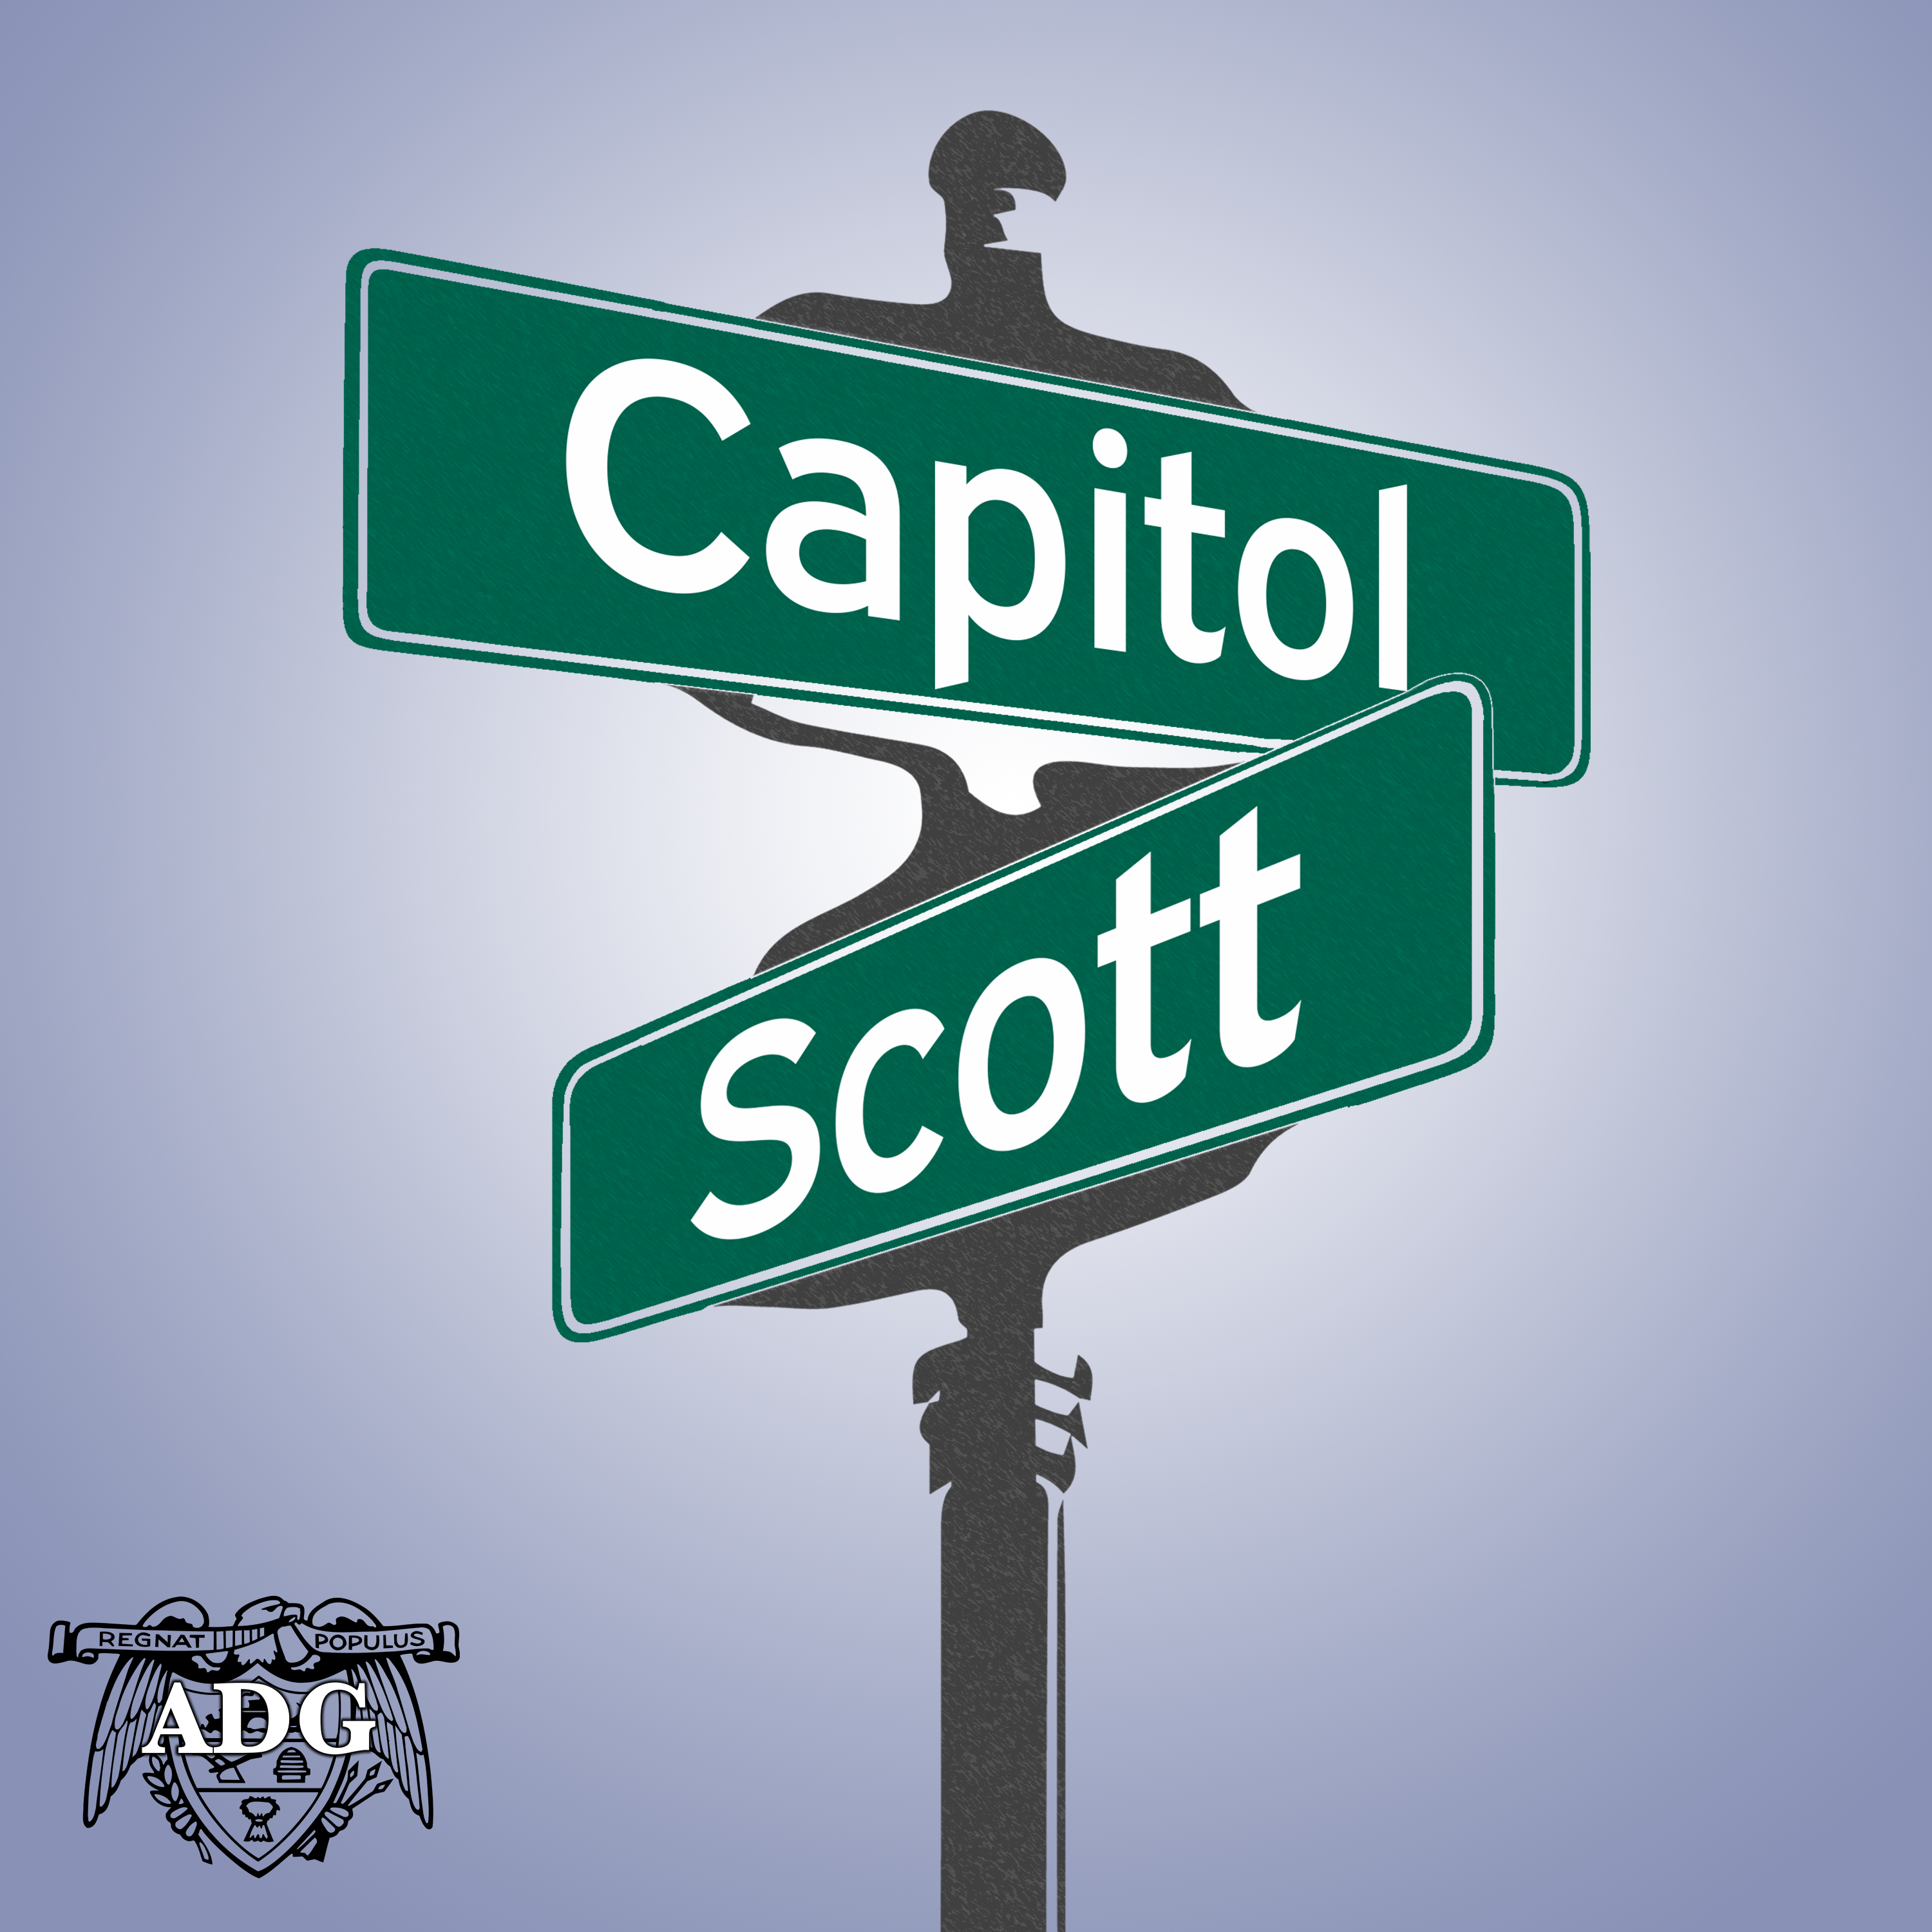 Capitol & Scott: The Southern Baptist Convention